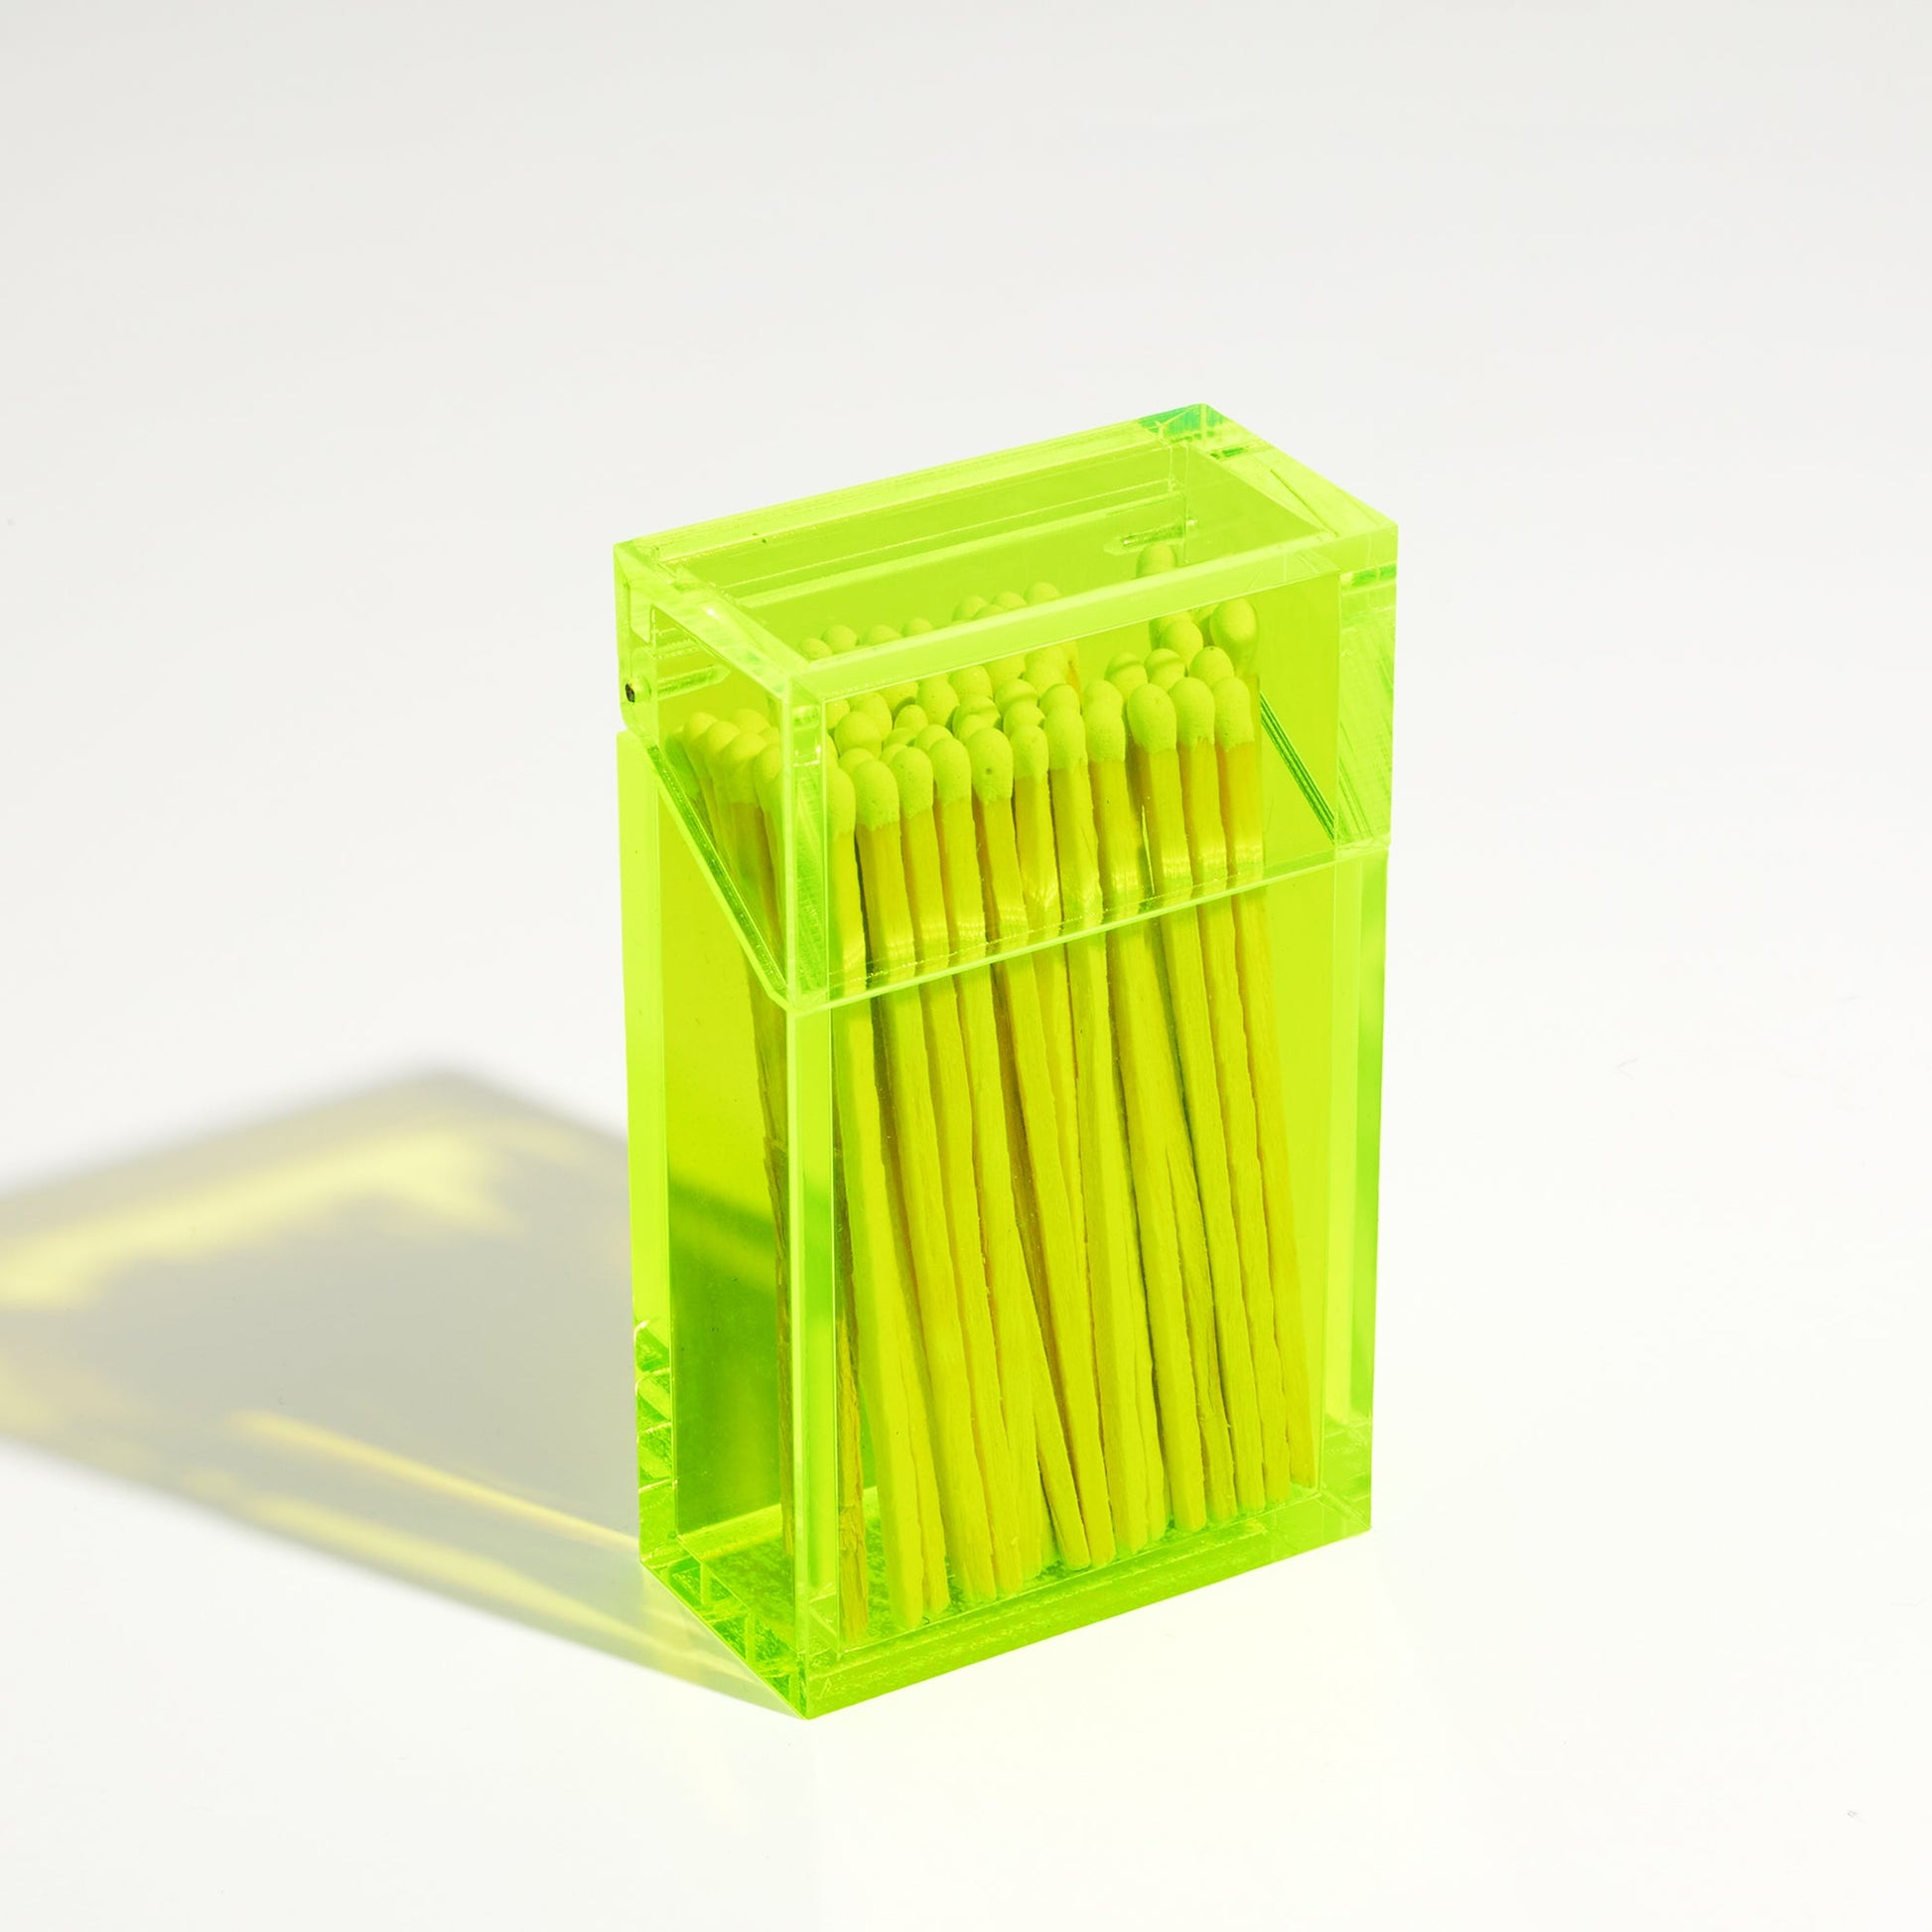 Closed Opened Match holder shaped like a Cigarette Case. Made with neon green acrylic. Case holds White matches in it.